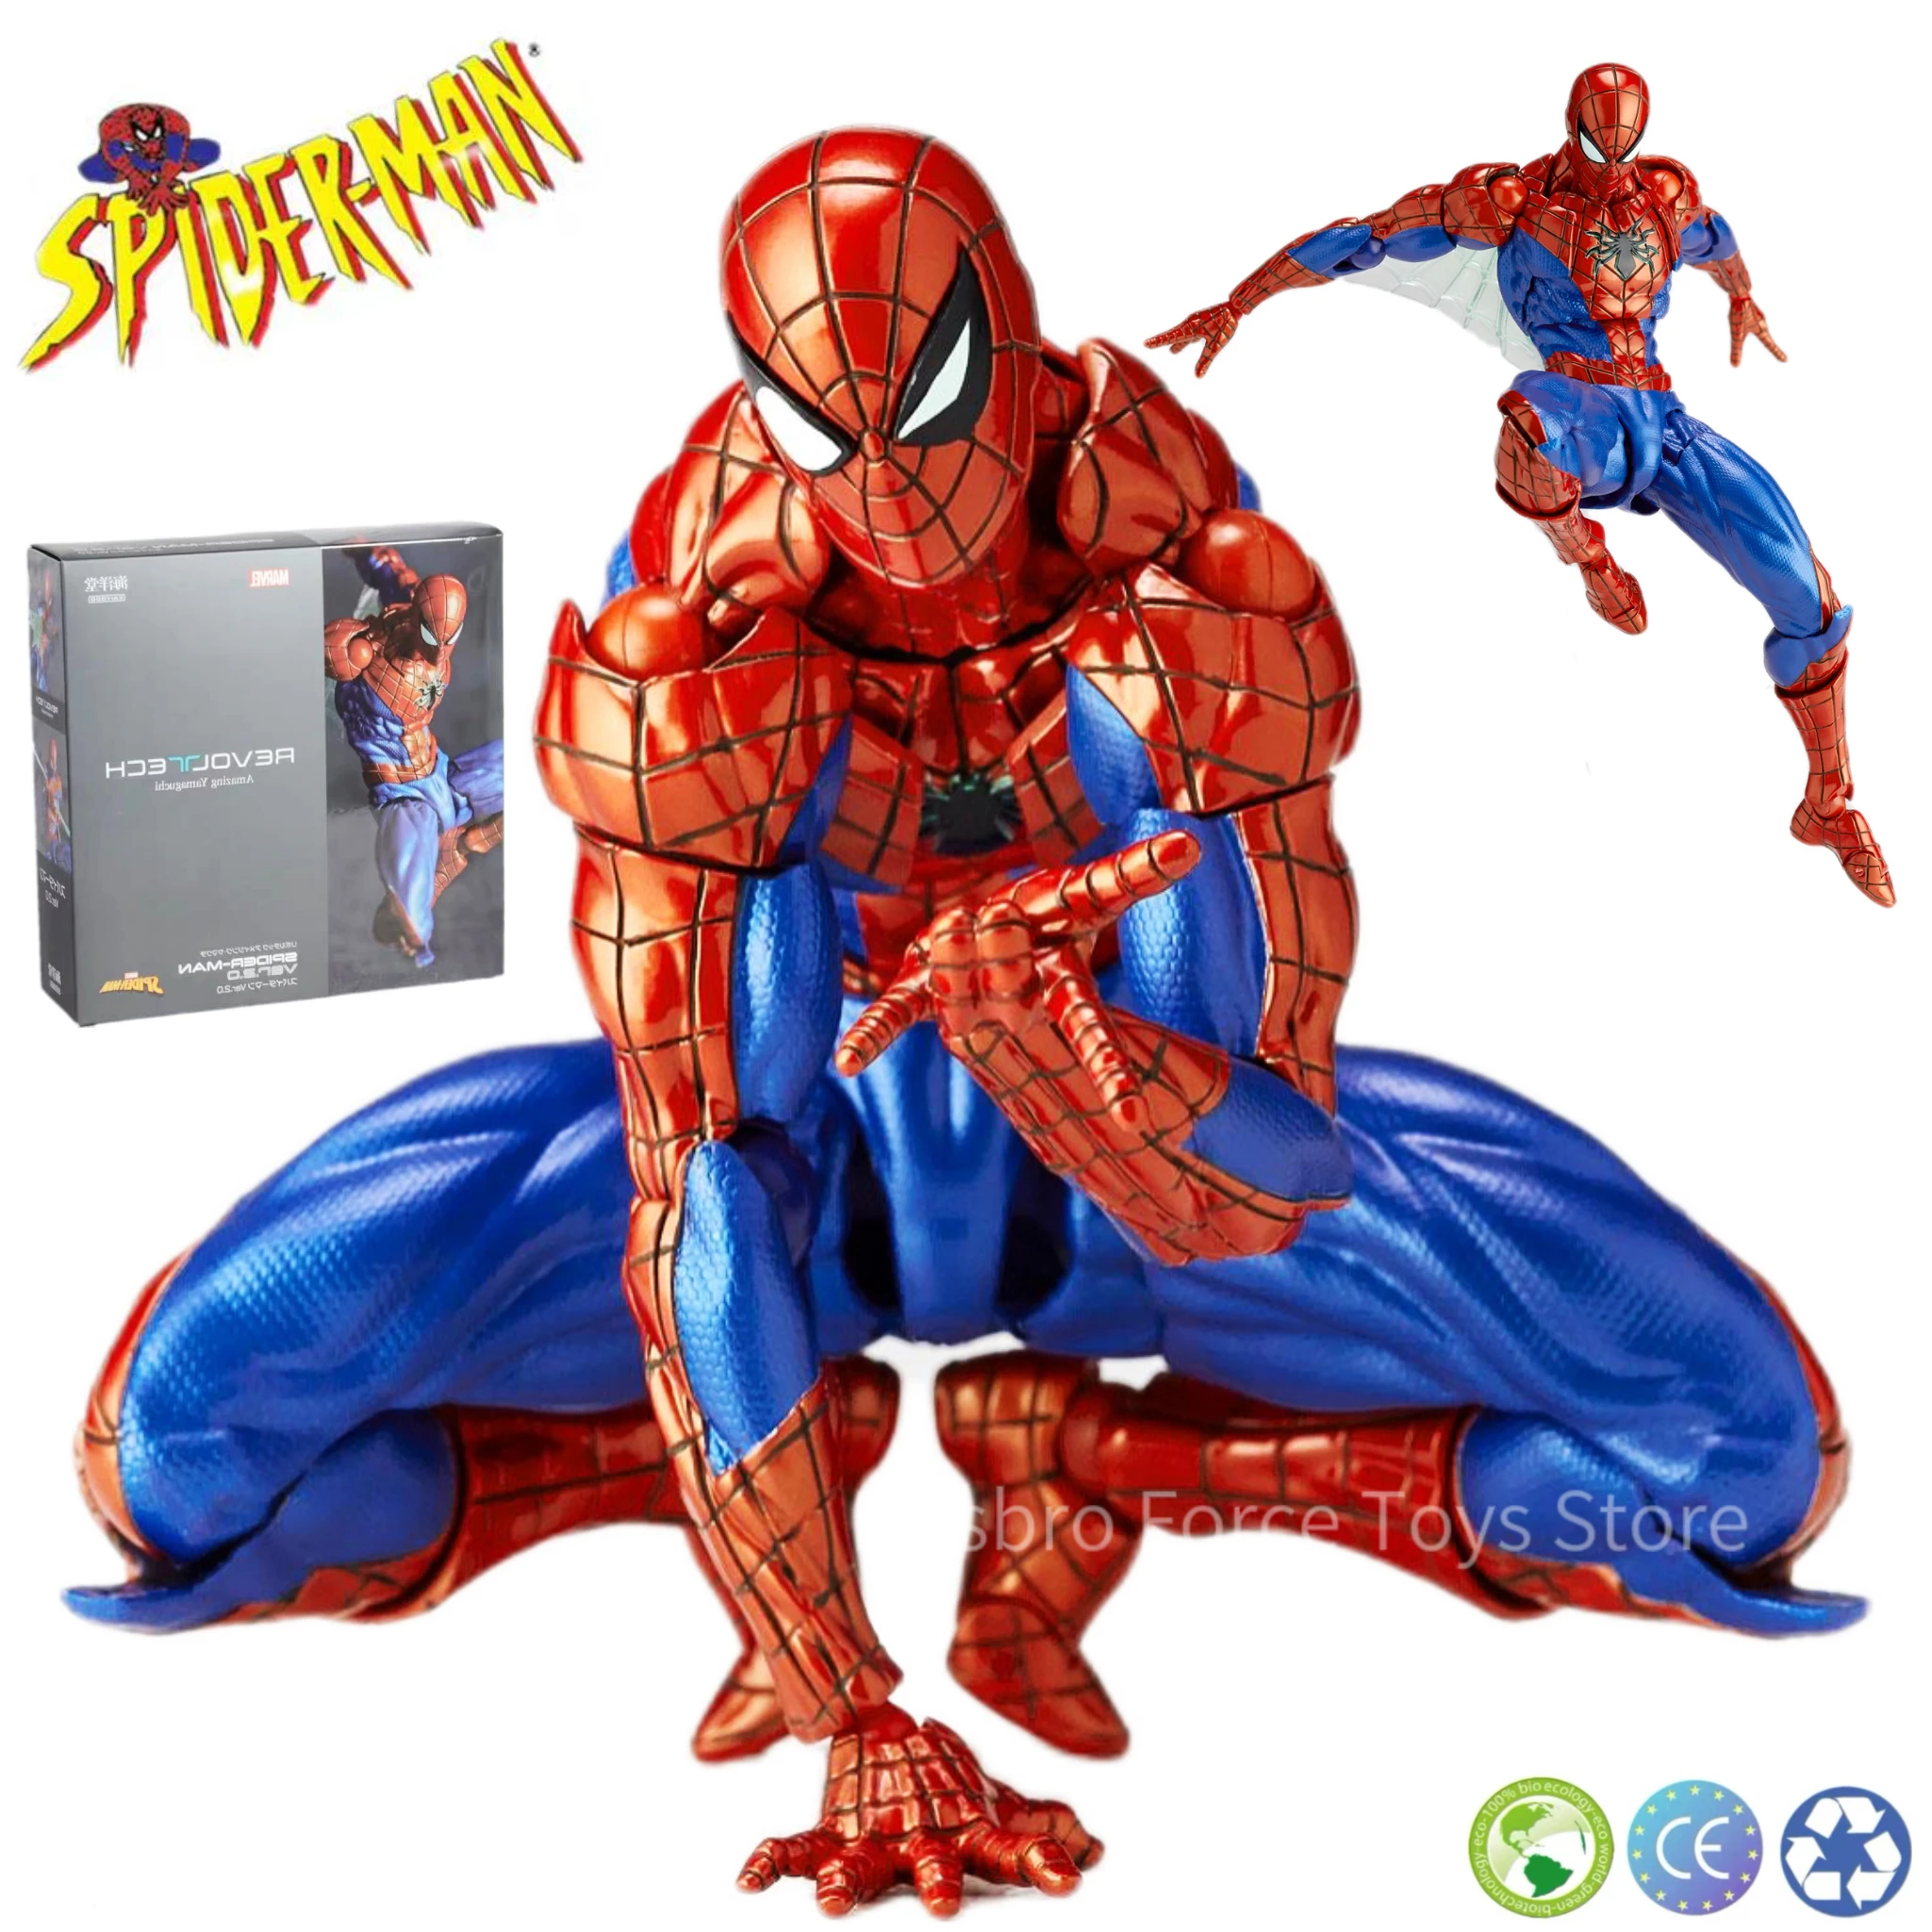 

In Stock KAIYODO Spider-Man 2.0 Revoltech AMAZING YAMAGUCHI 16cm MK4 Peter Parker Anime Action Collection Figures Model Toys